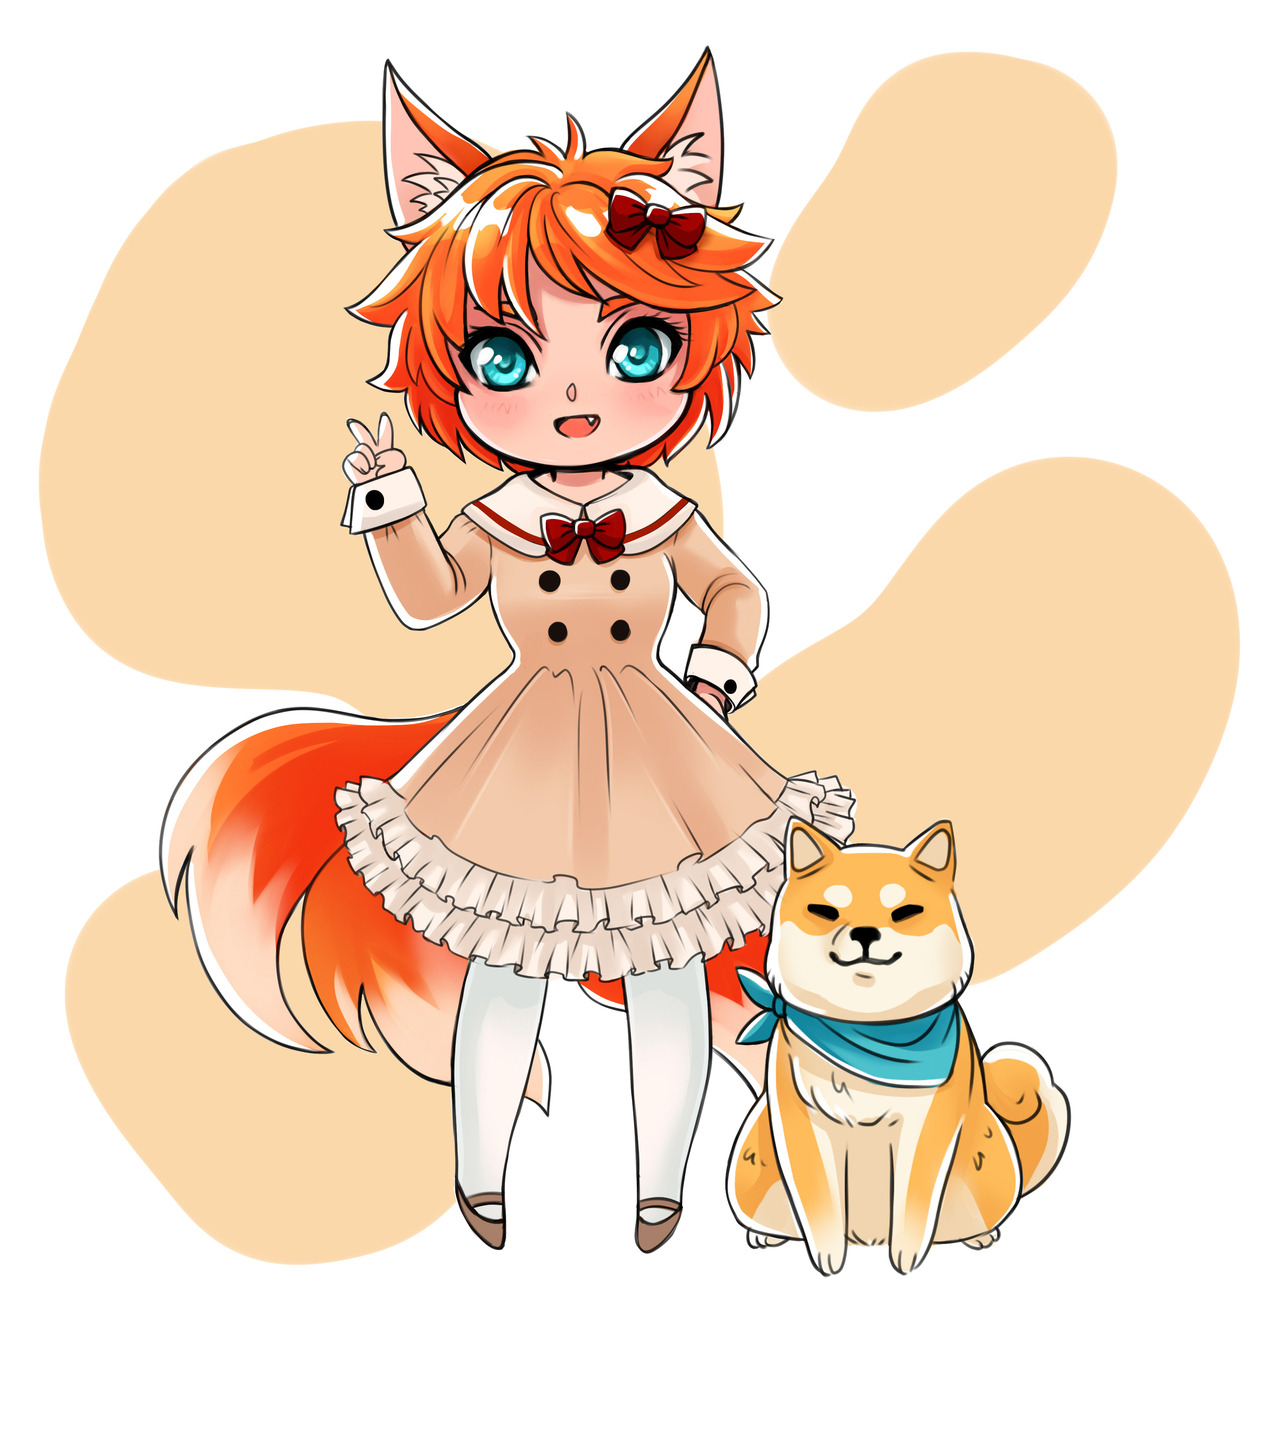 cute chibi anime style - Artists&Clients